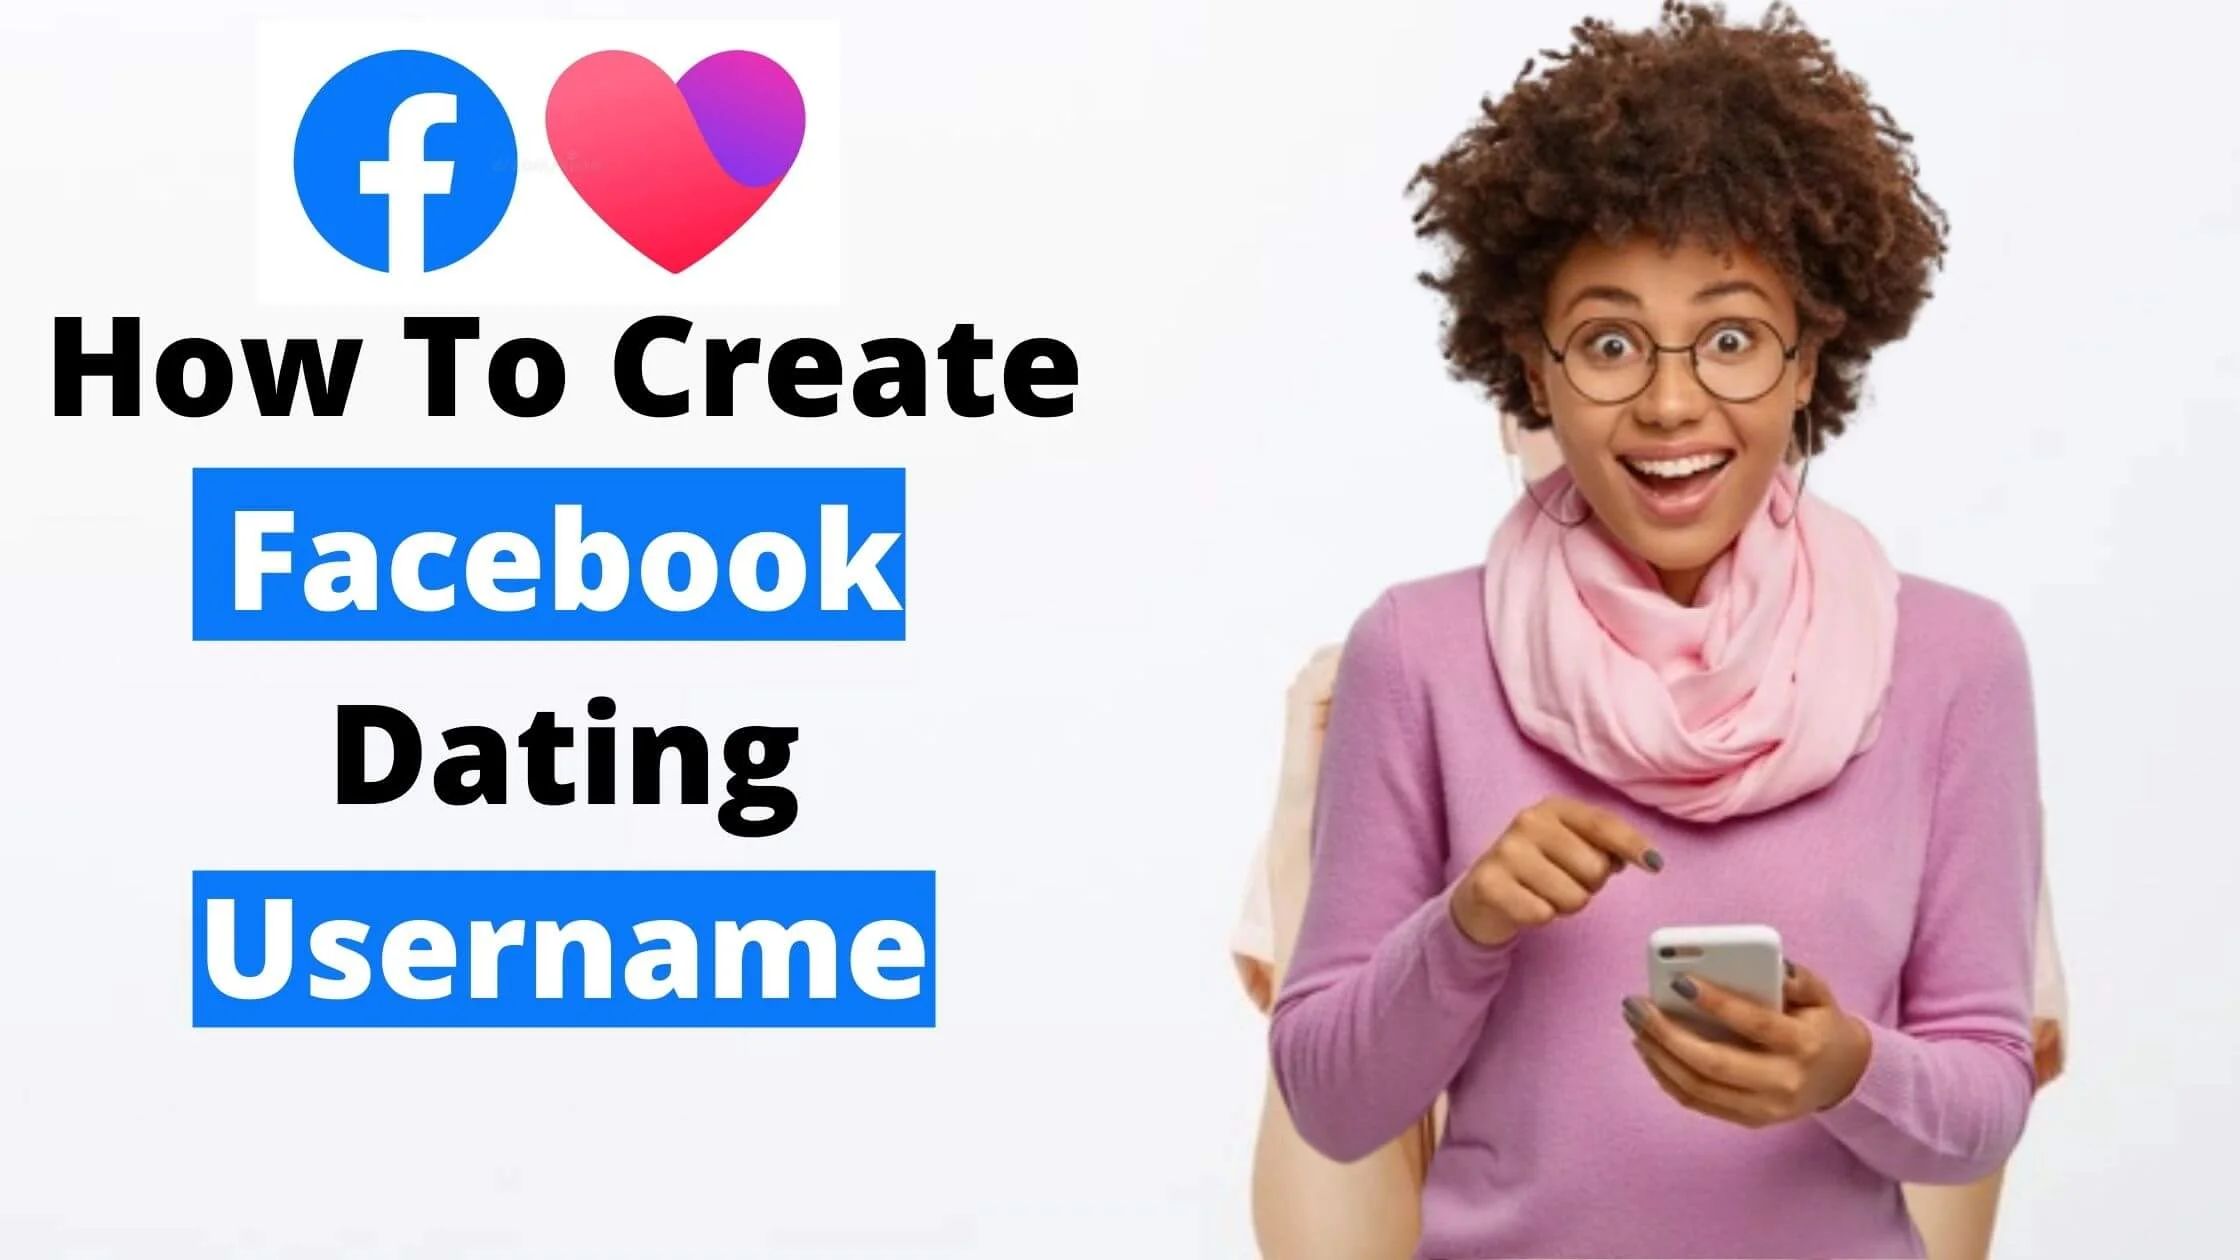 How To Create Facebook Dating Username